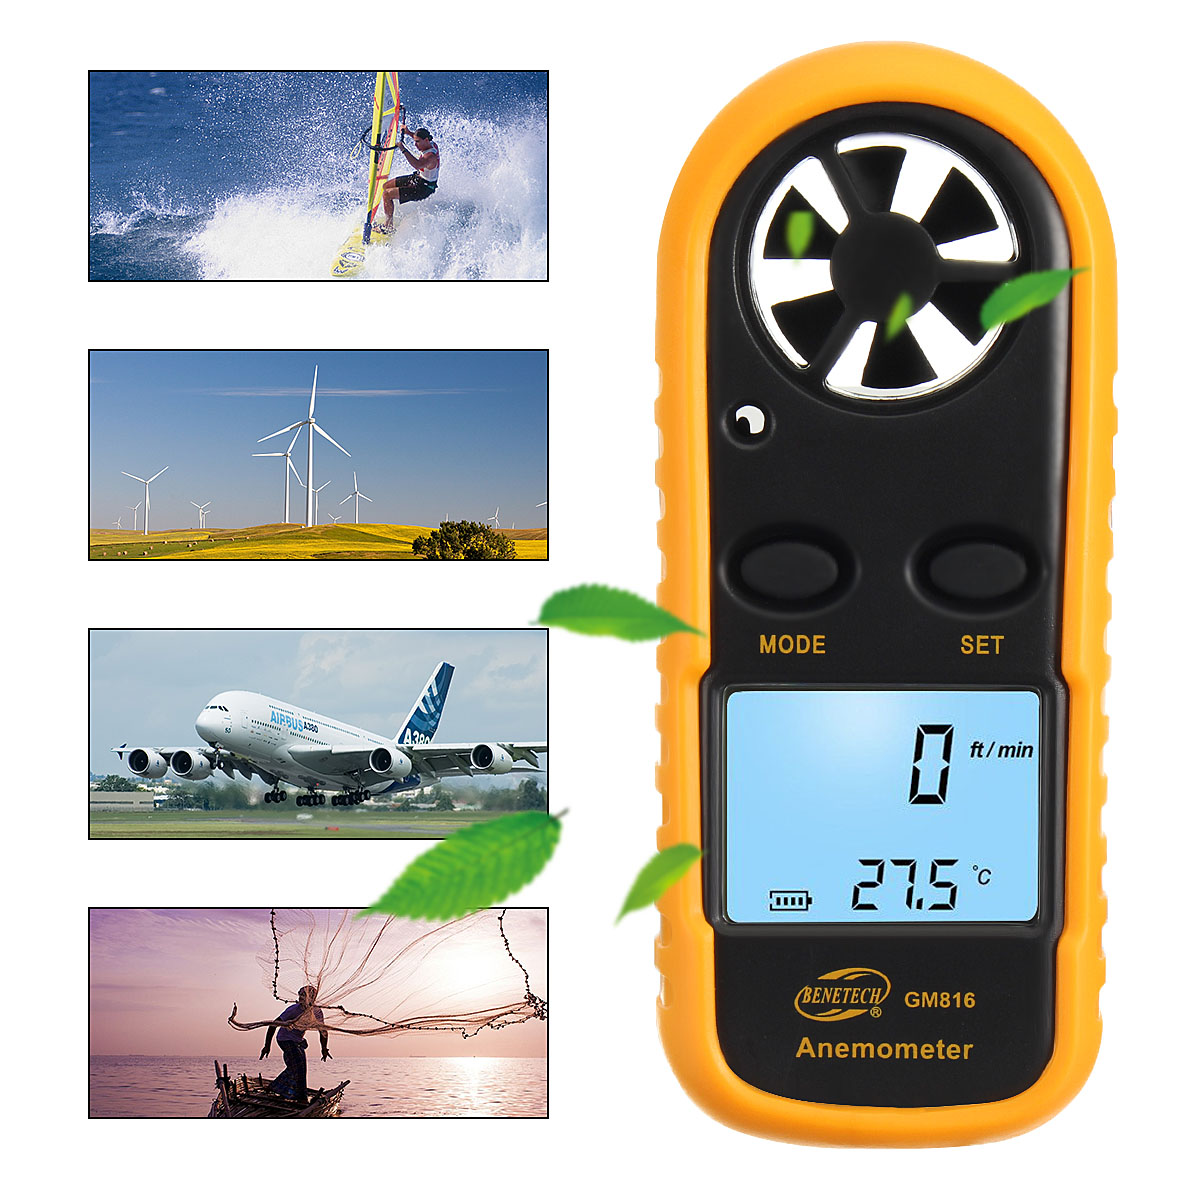 Digital-LCD-Anemometer-Thermometer-Air-Wind-Speed-Meter-Temperature-Tester-1277544-3